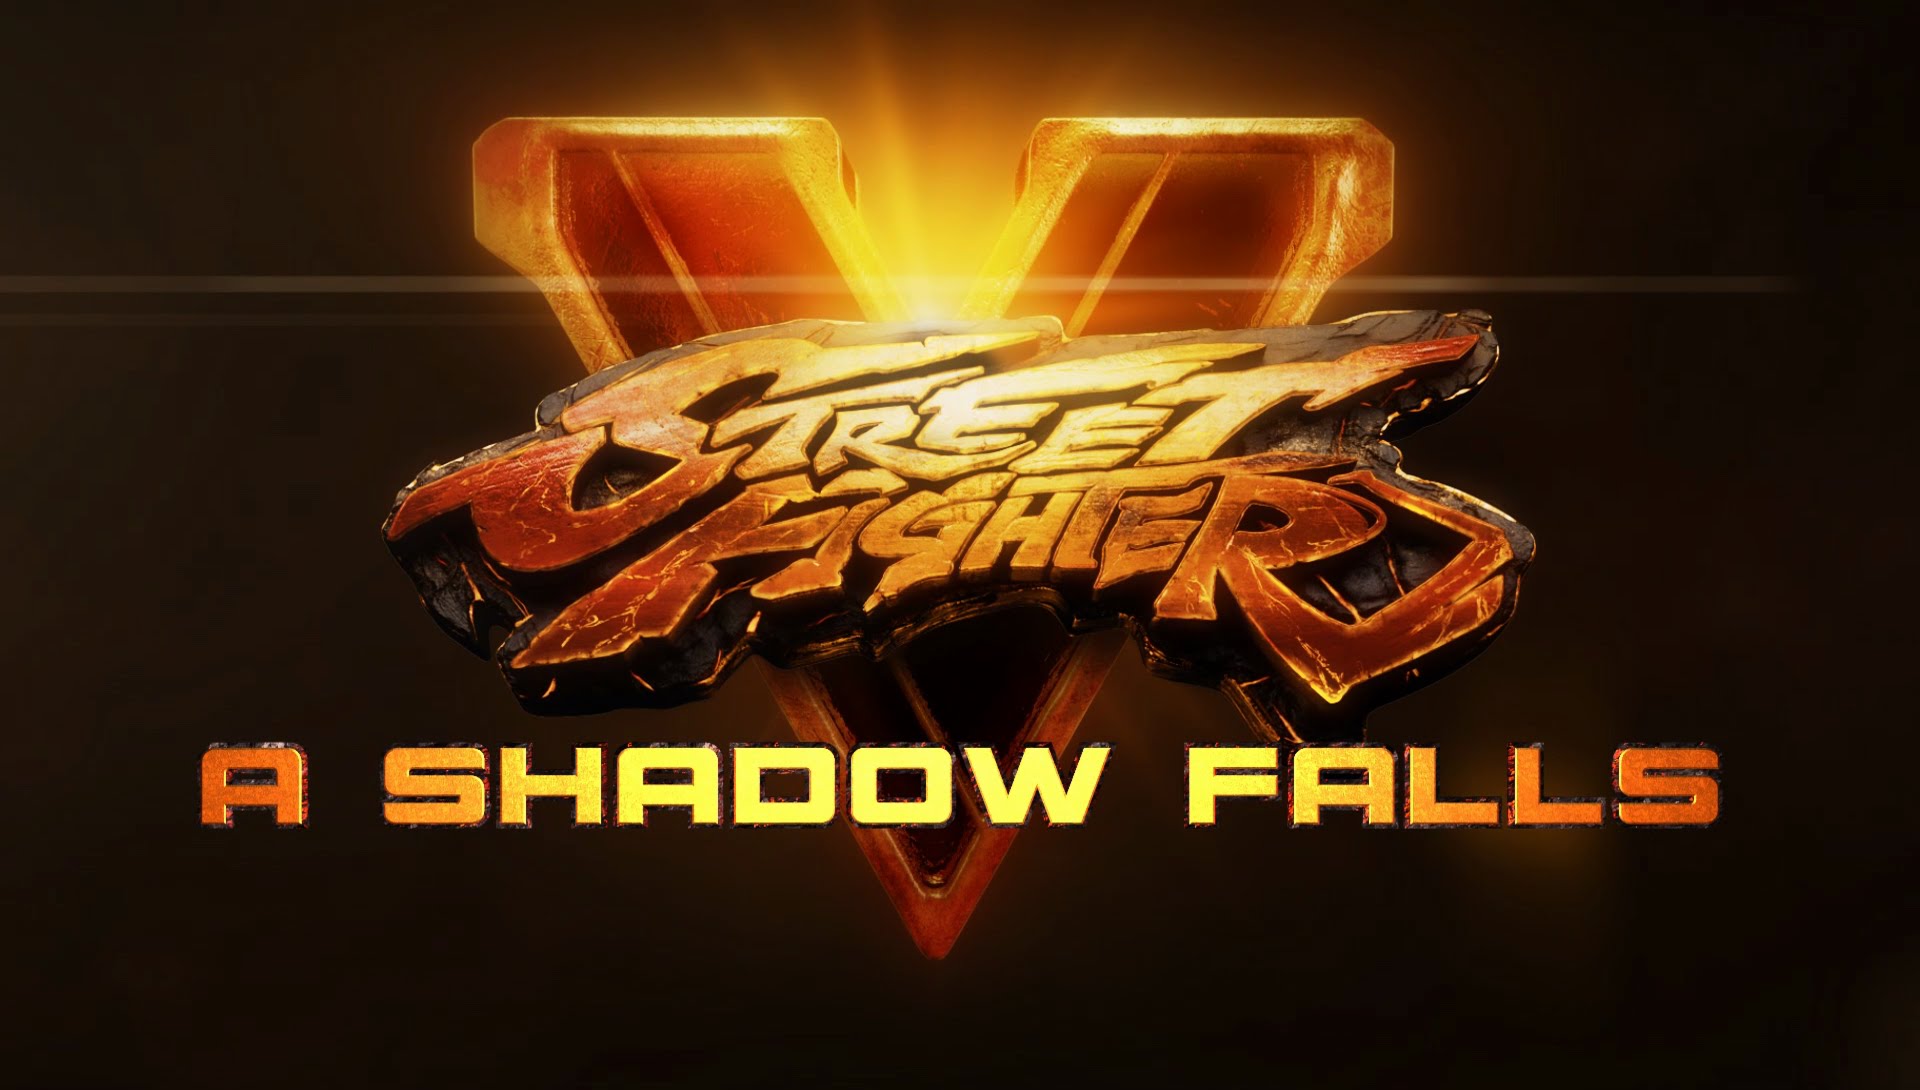 Street Fighter V - A Shadow Falls, Launch Trailer